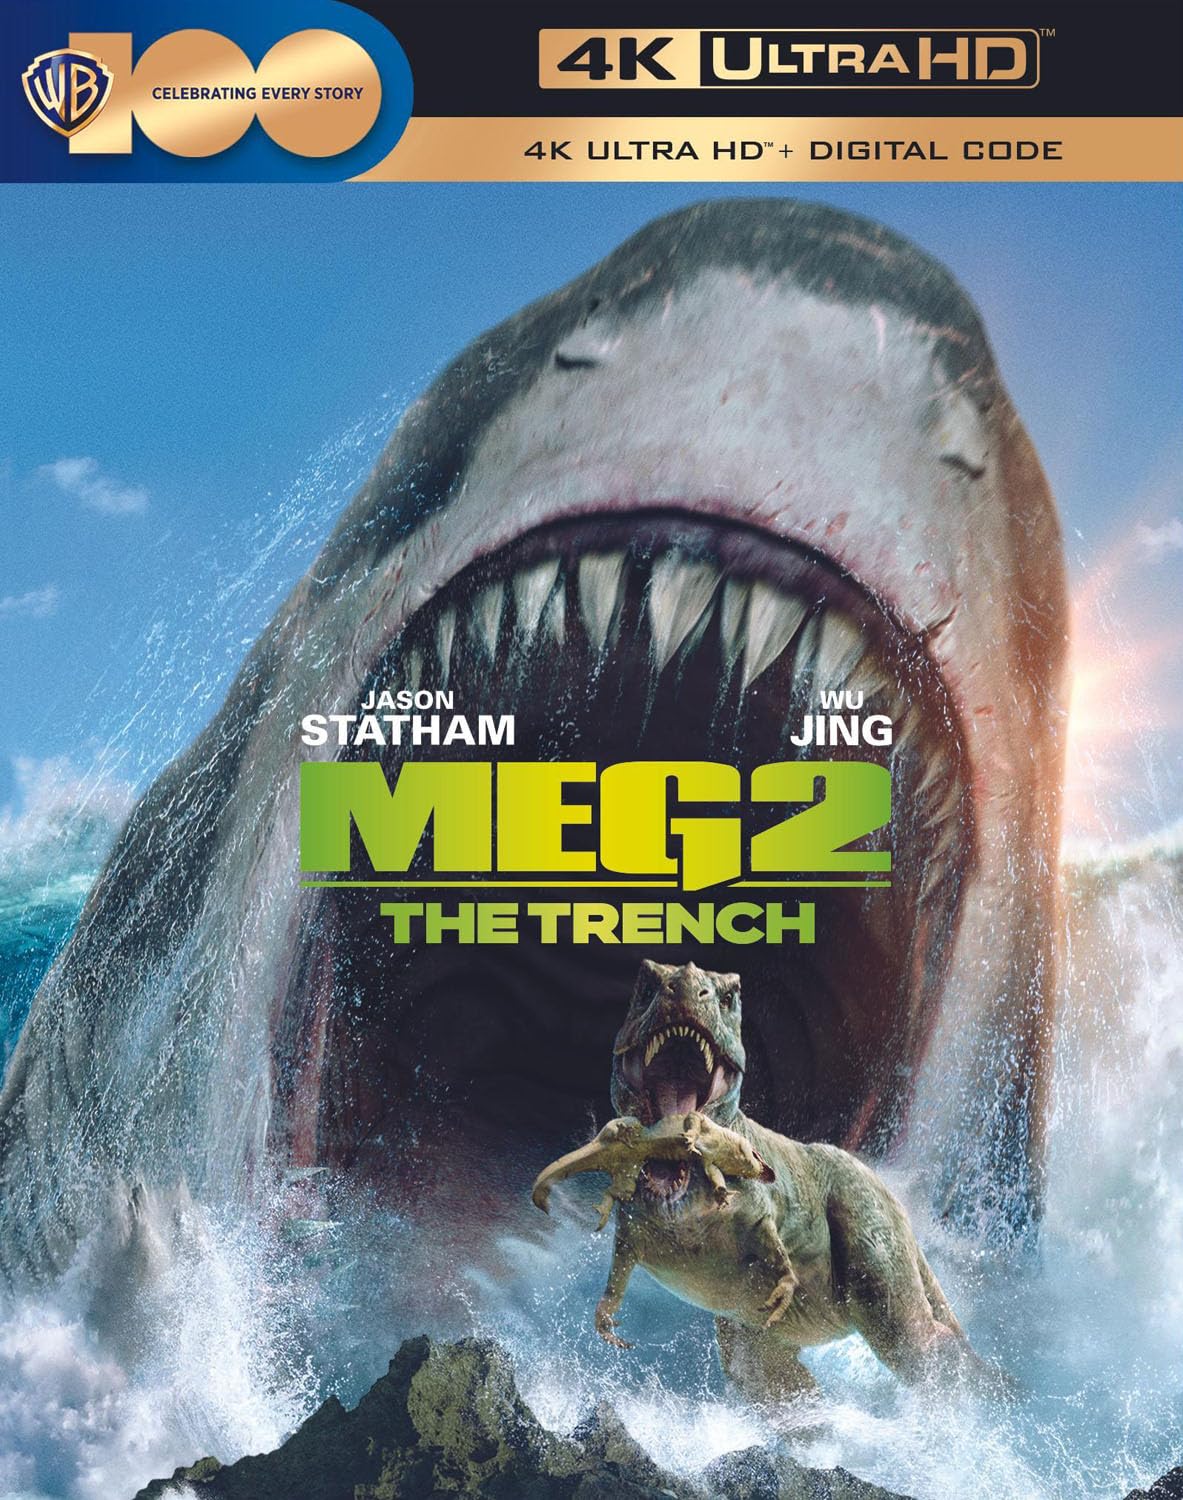 The Meg 2: The Trench (DVD)